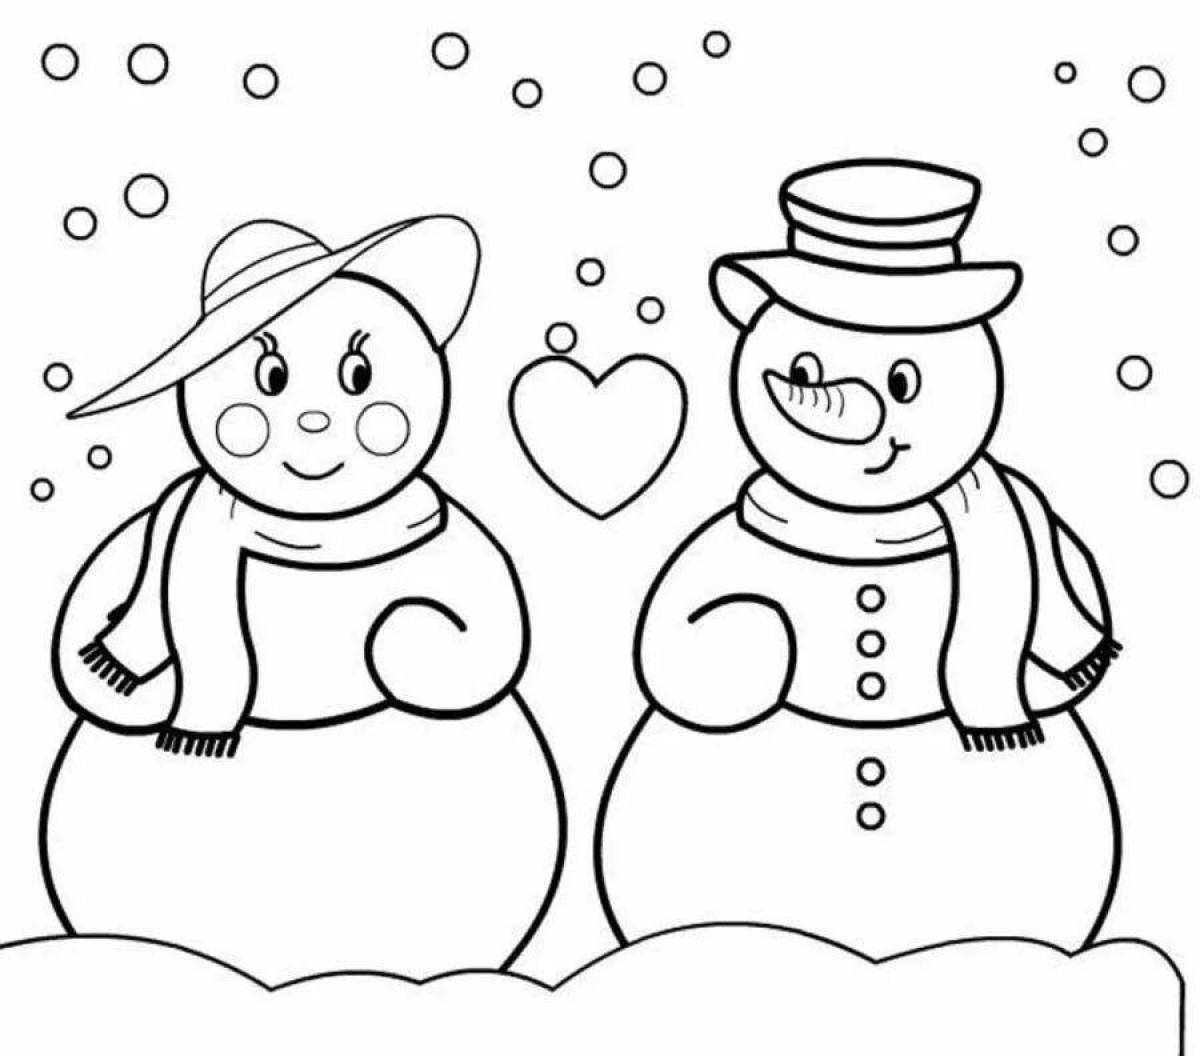 Creative snowman coloring book for 2-3 year olds